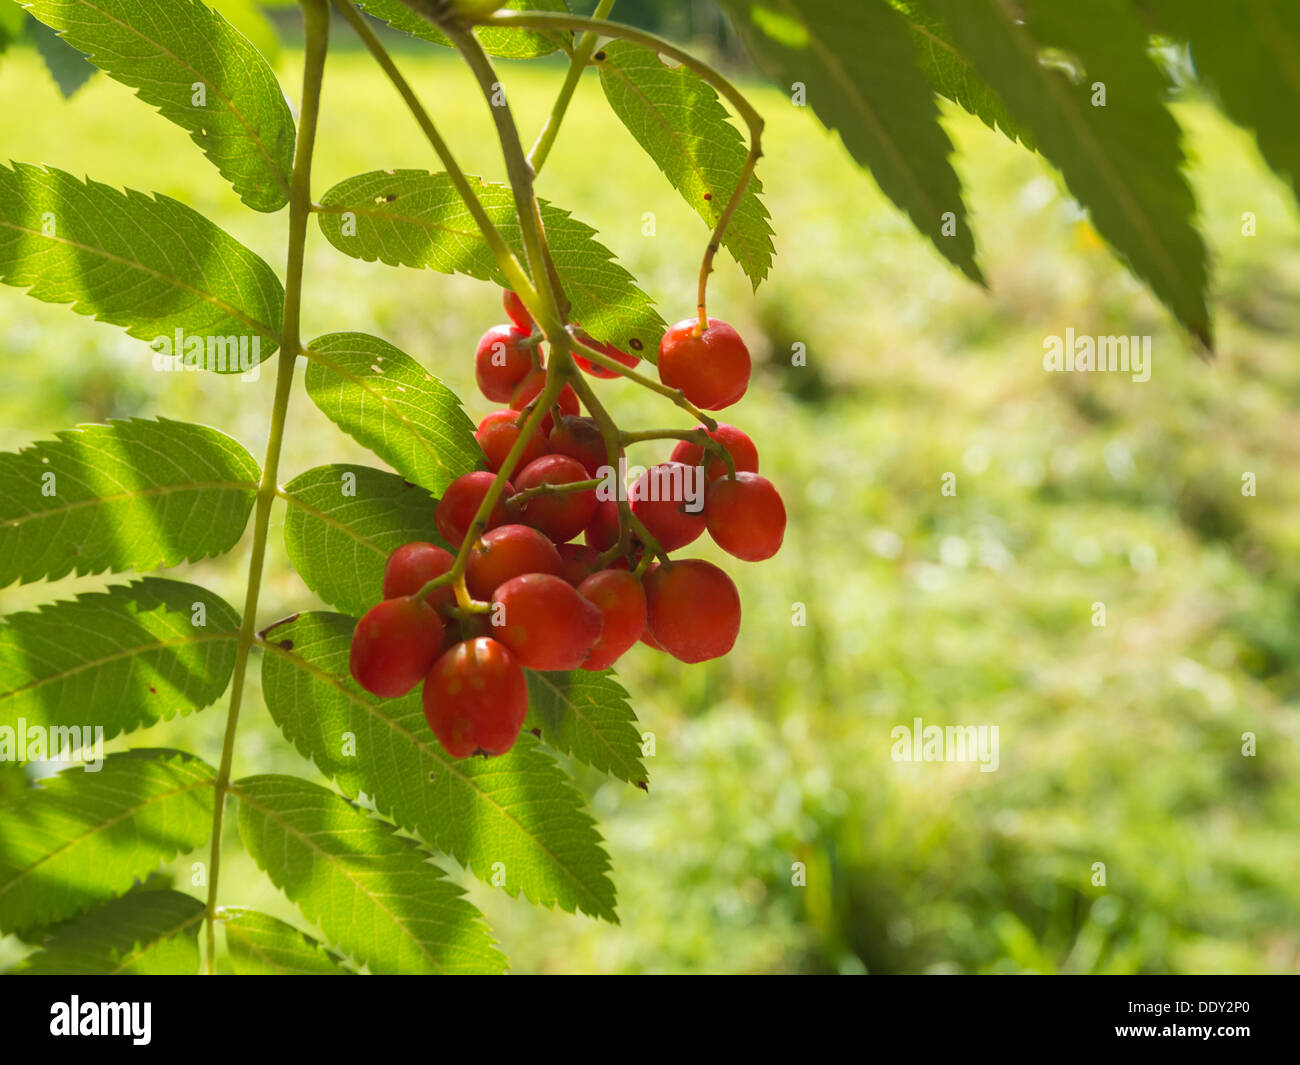 Photograph of some red berries hanging from a tree on a bright summers day set against brightly lit green leaves. Stock Photo